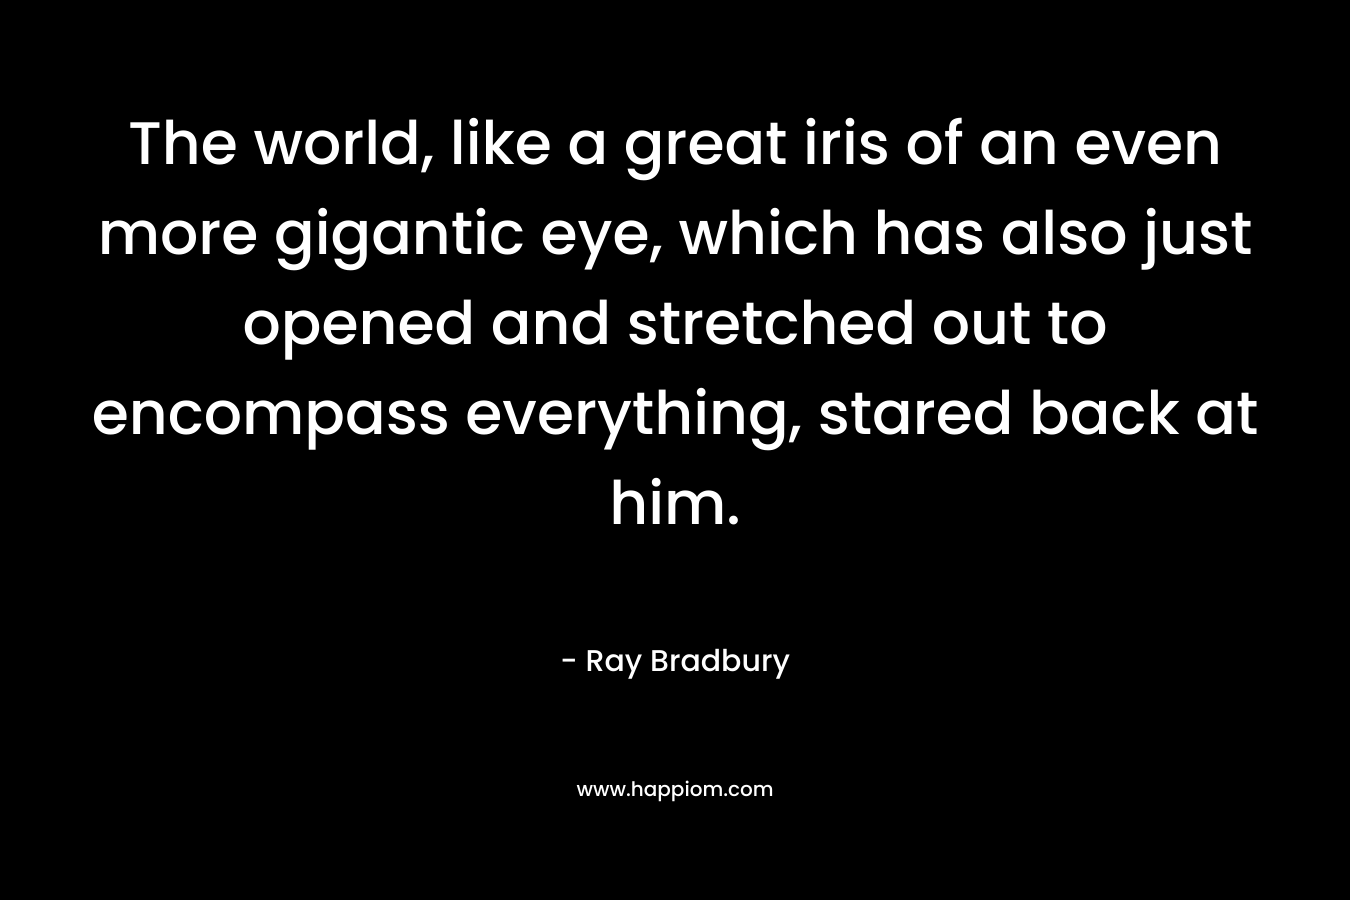 The world, like a great iris of an even more gigantic eye, which has also just opened and stretched out to encompass everything, stared back at him. – Ray Bradbury